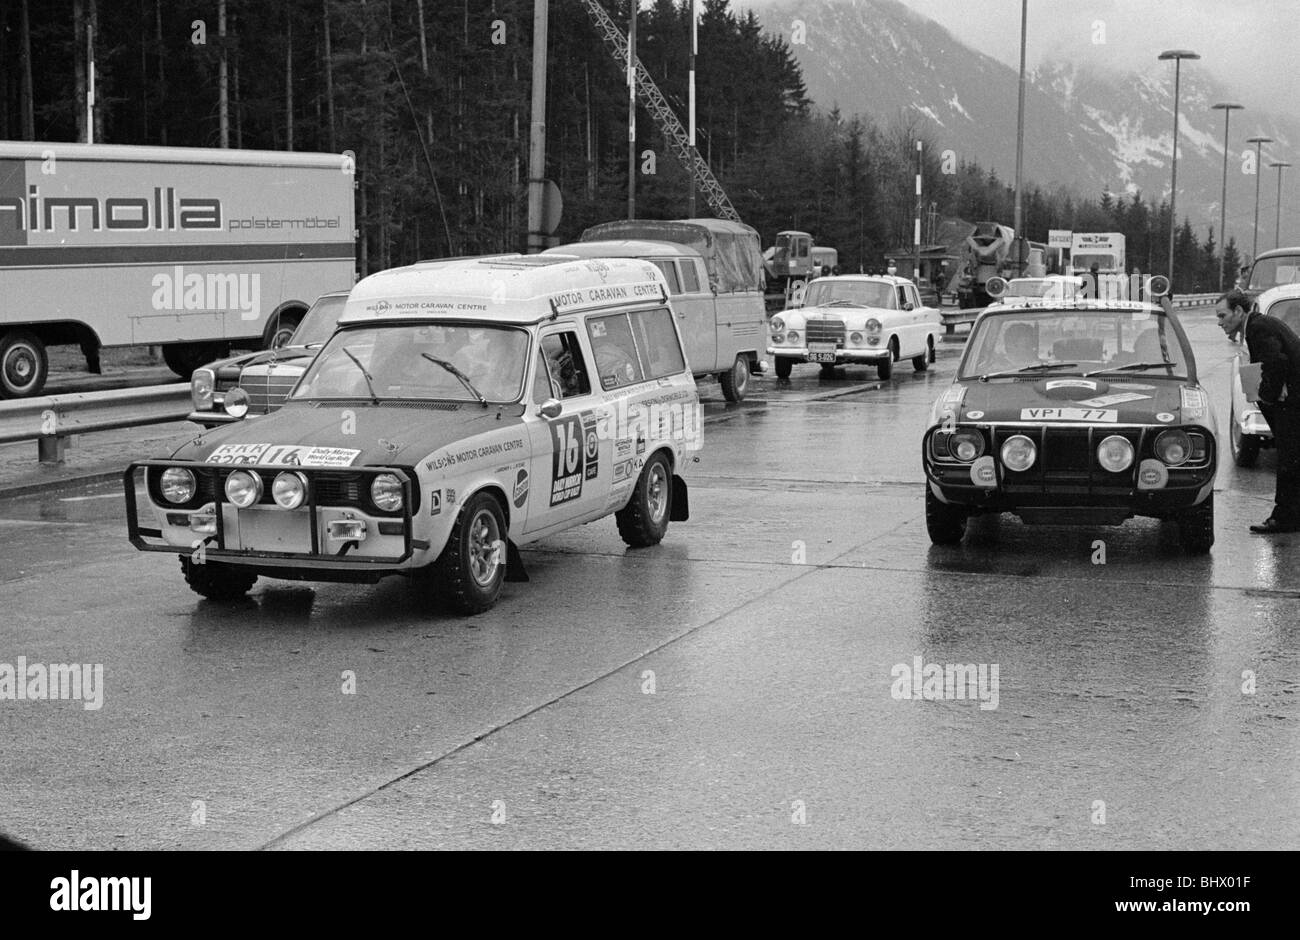 Daily Mirror World Cup Rally April 19th - May 27th 1970. Car number 16, an Escort Elba Motor Caravan driven by J. Gardner and Stock Photo